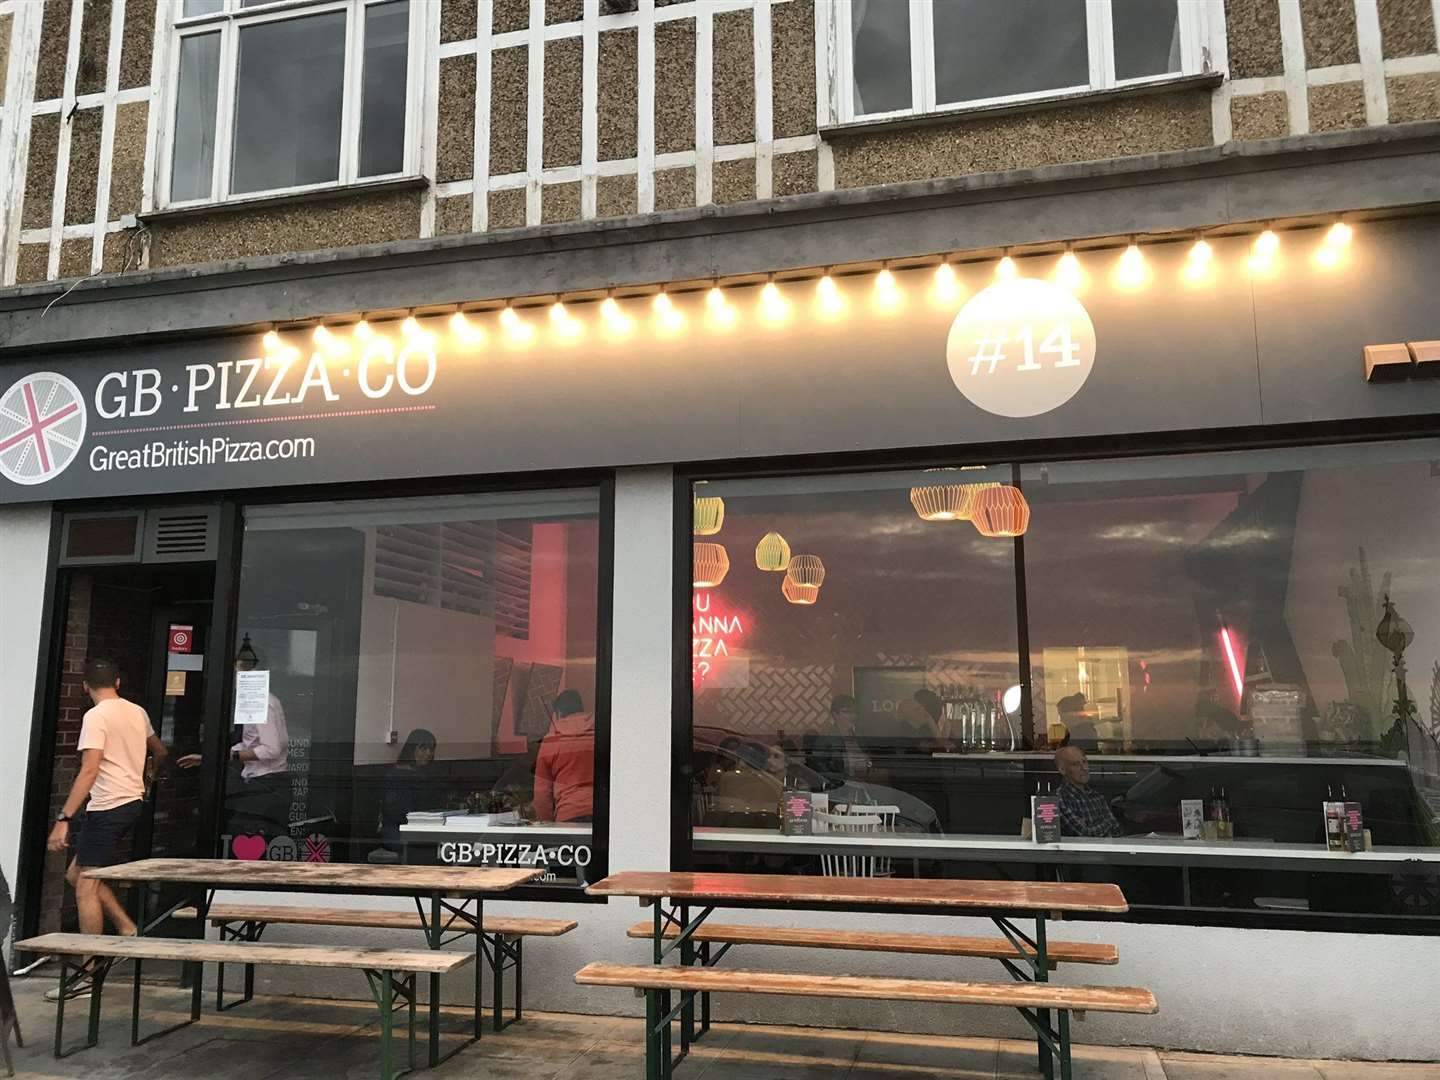 Staff were attacked at GB Pizza in Margate. Pic: GB Pizza